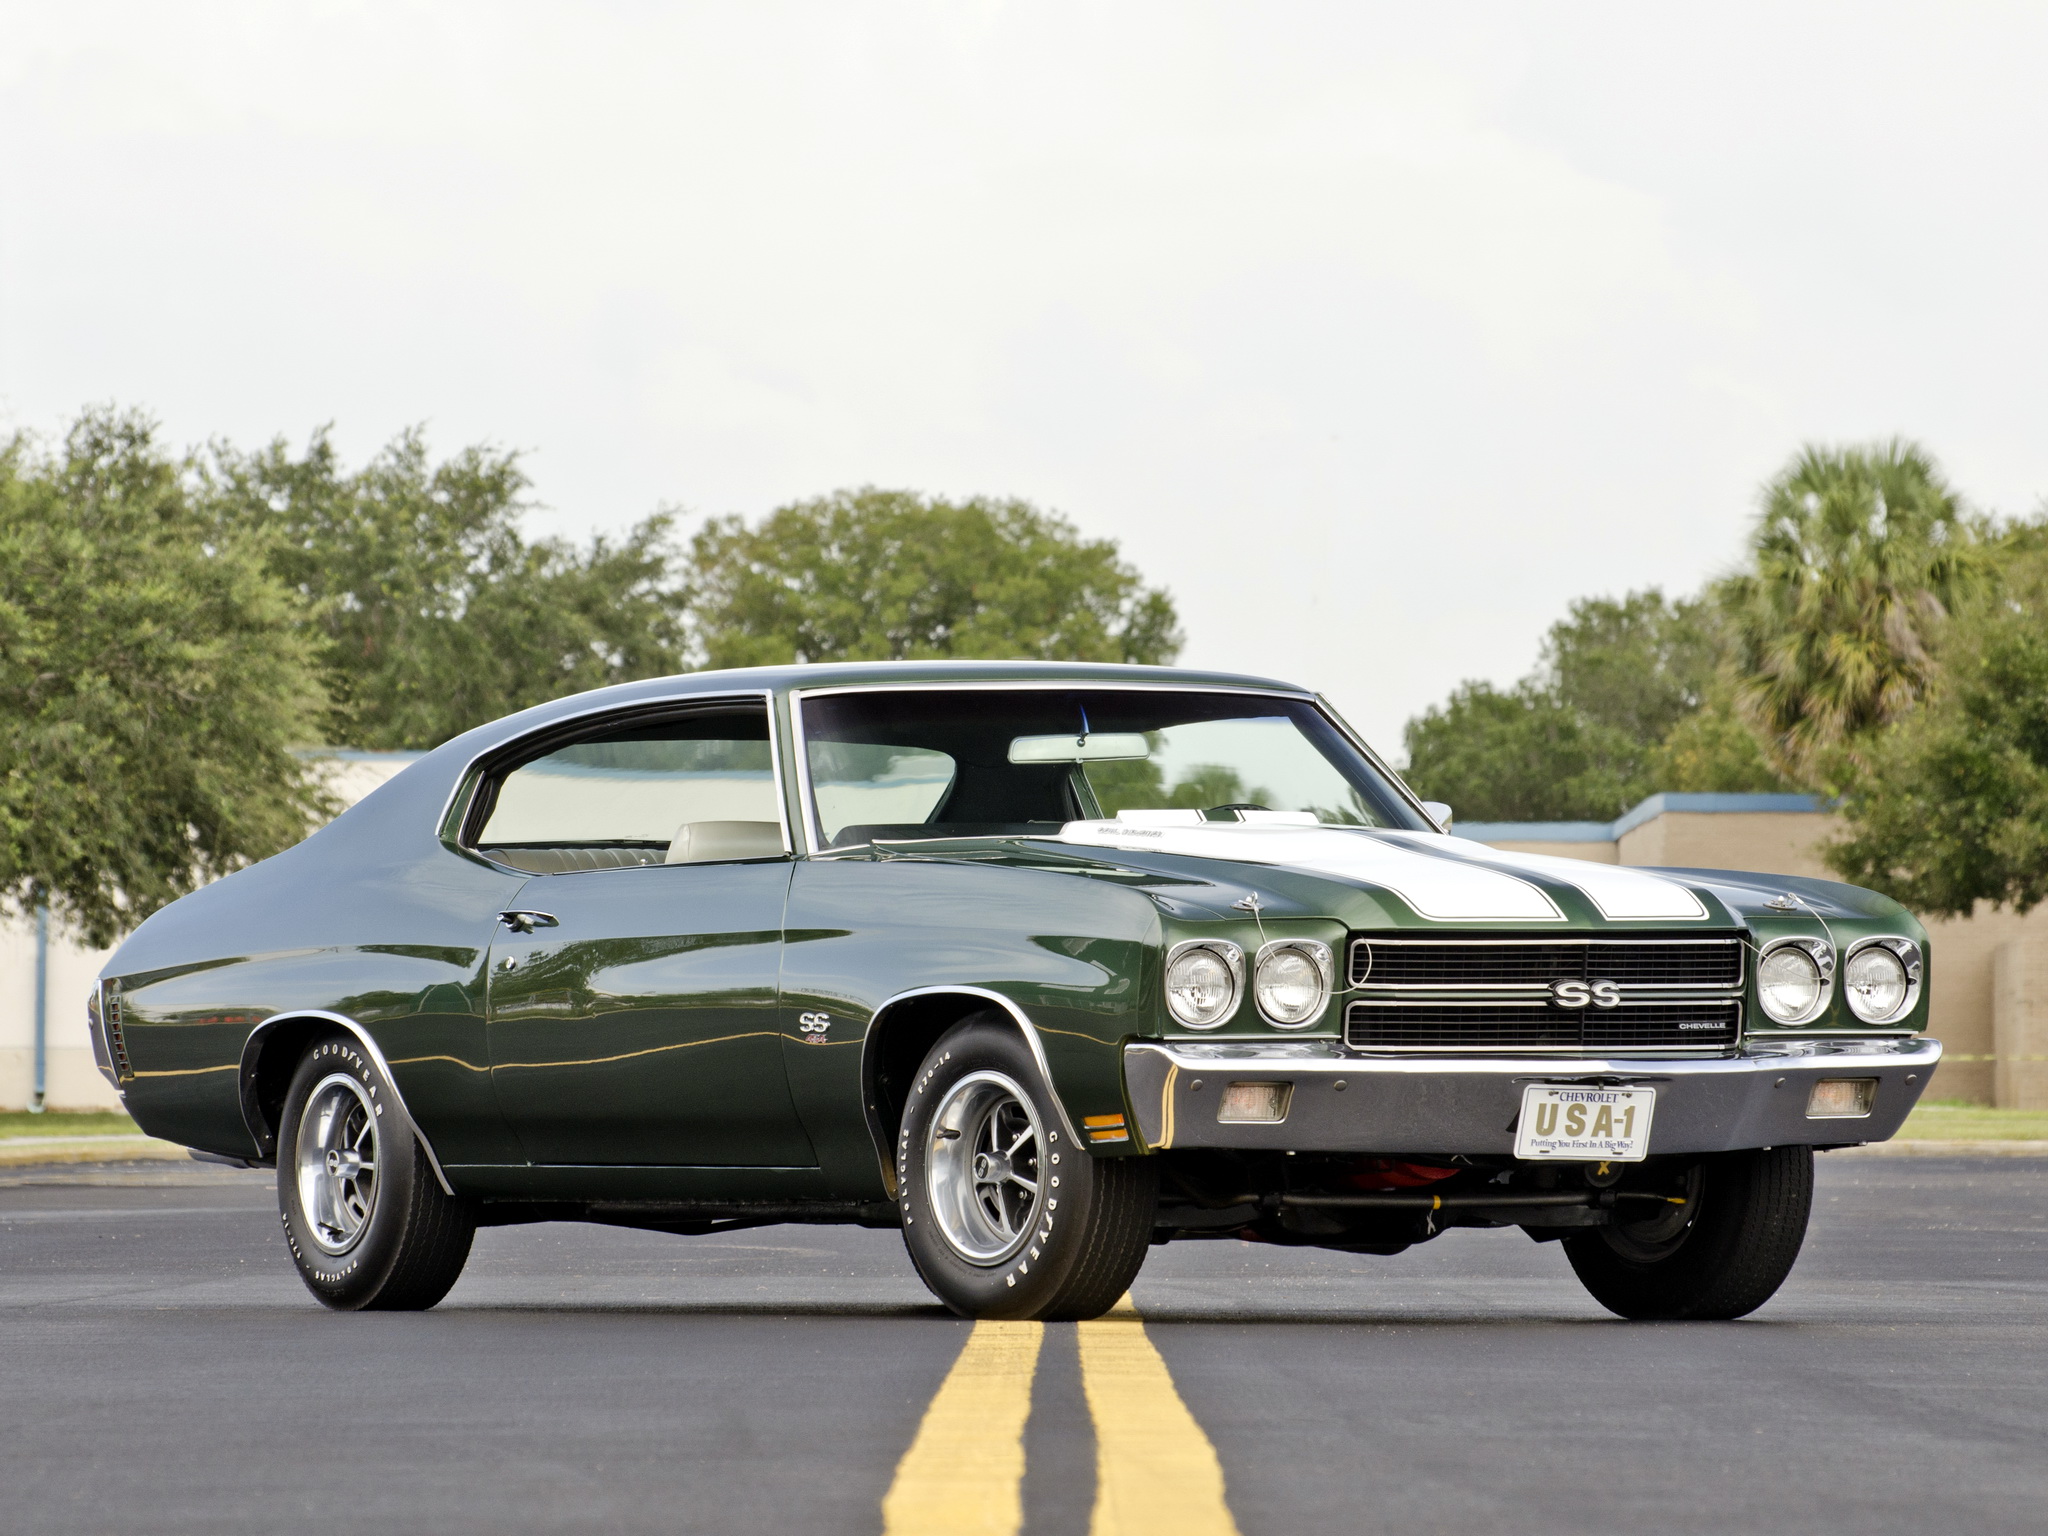 1970 Chevrolet Chevelle SS 454 LS6 Hardtop Coupe muscle classic s s c